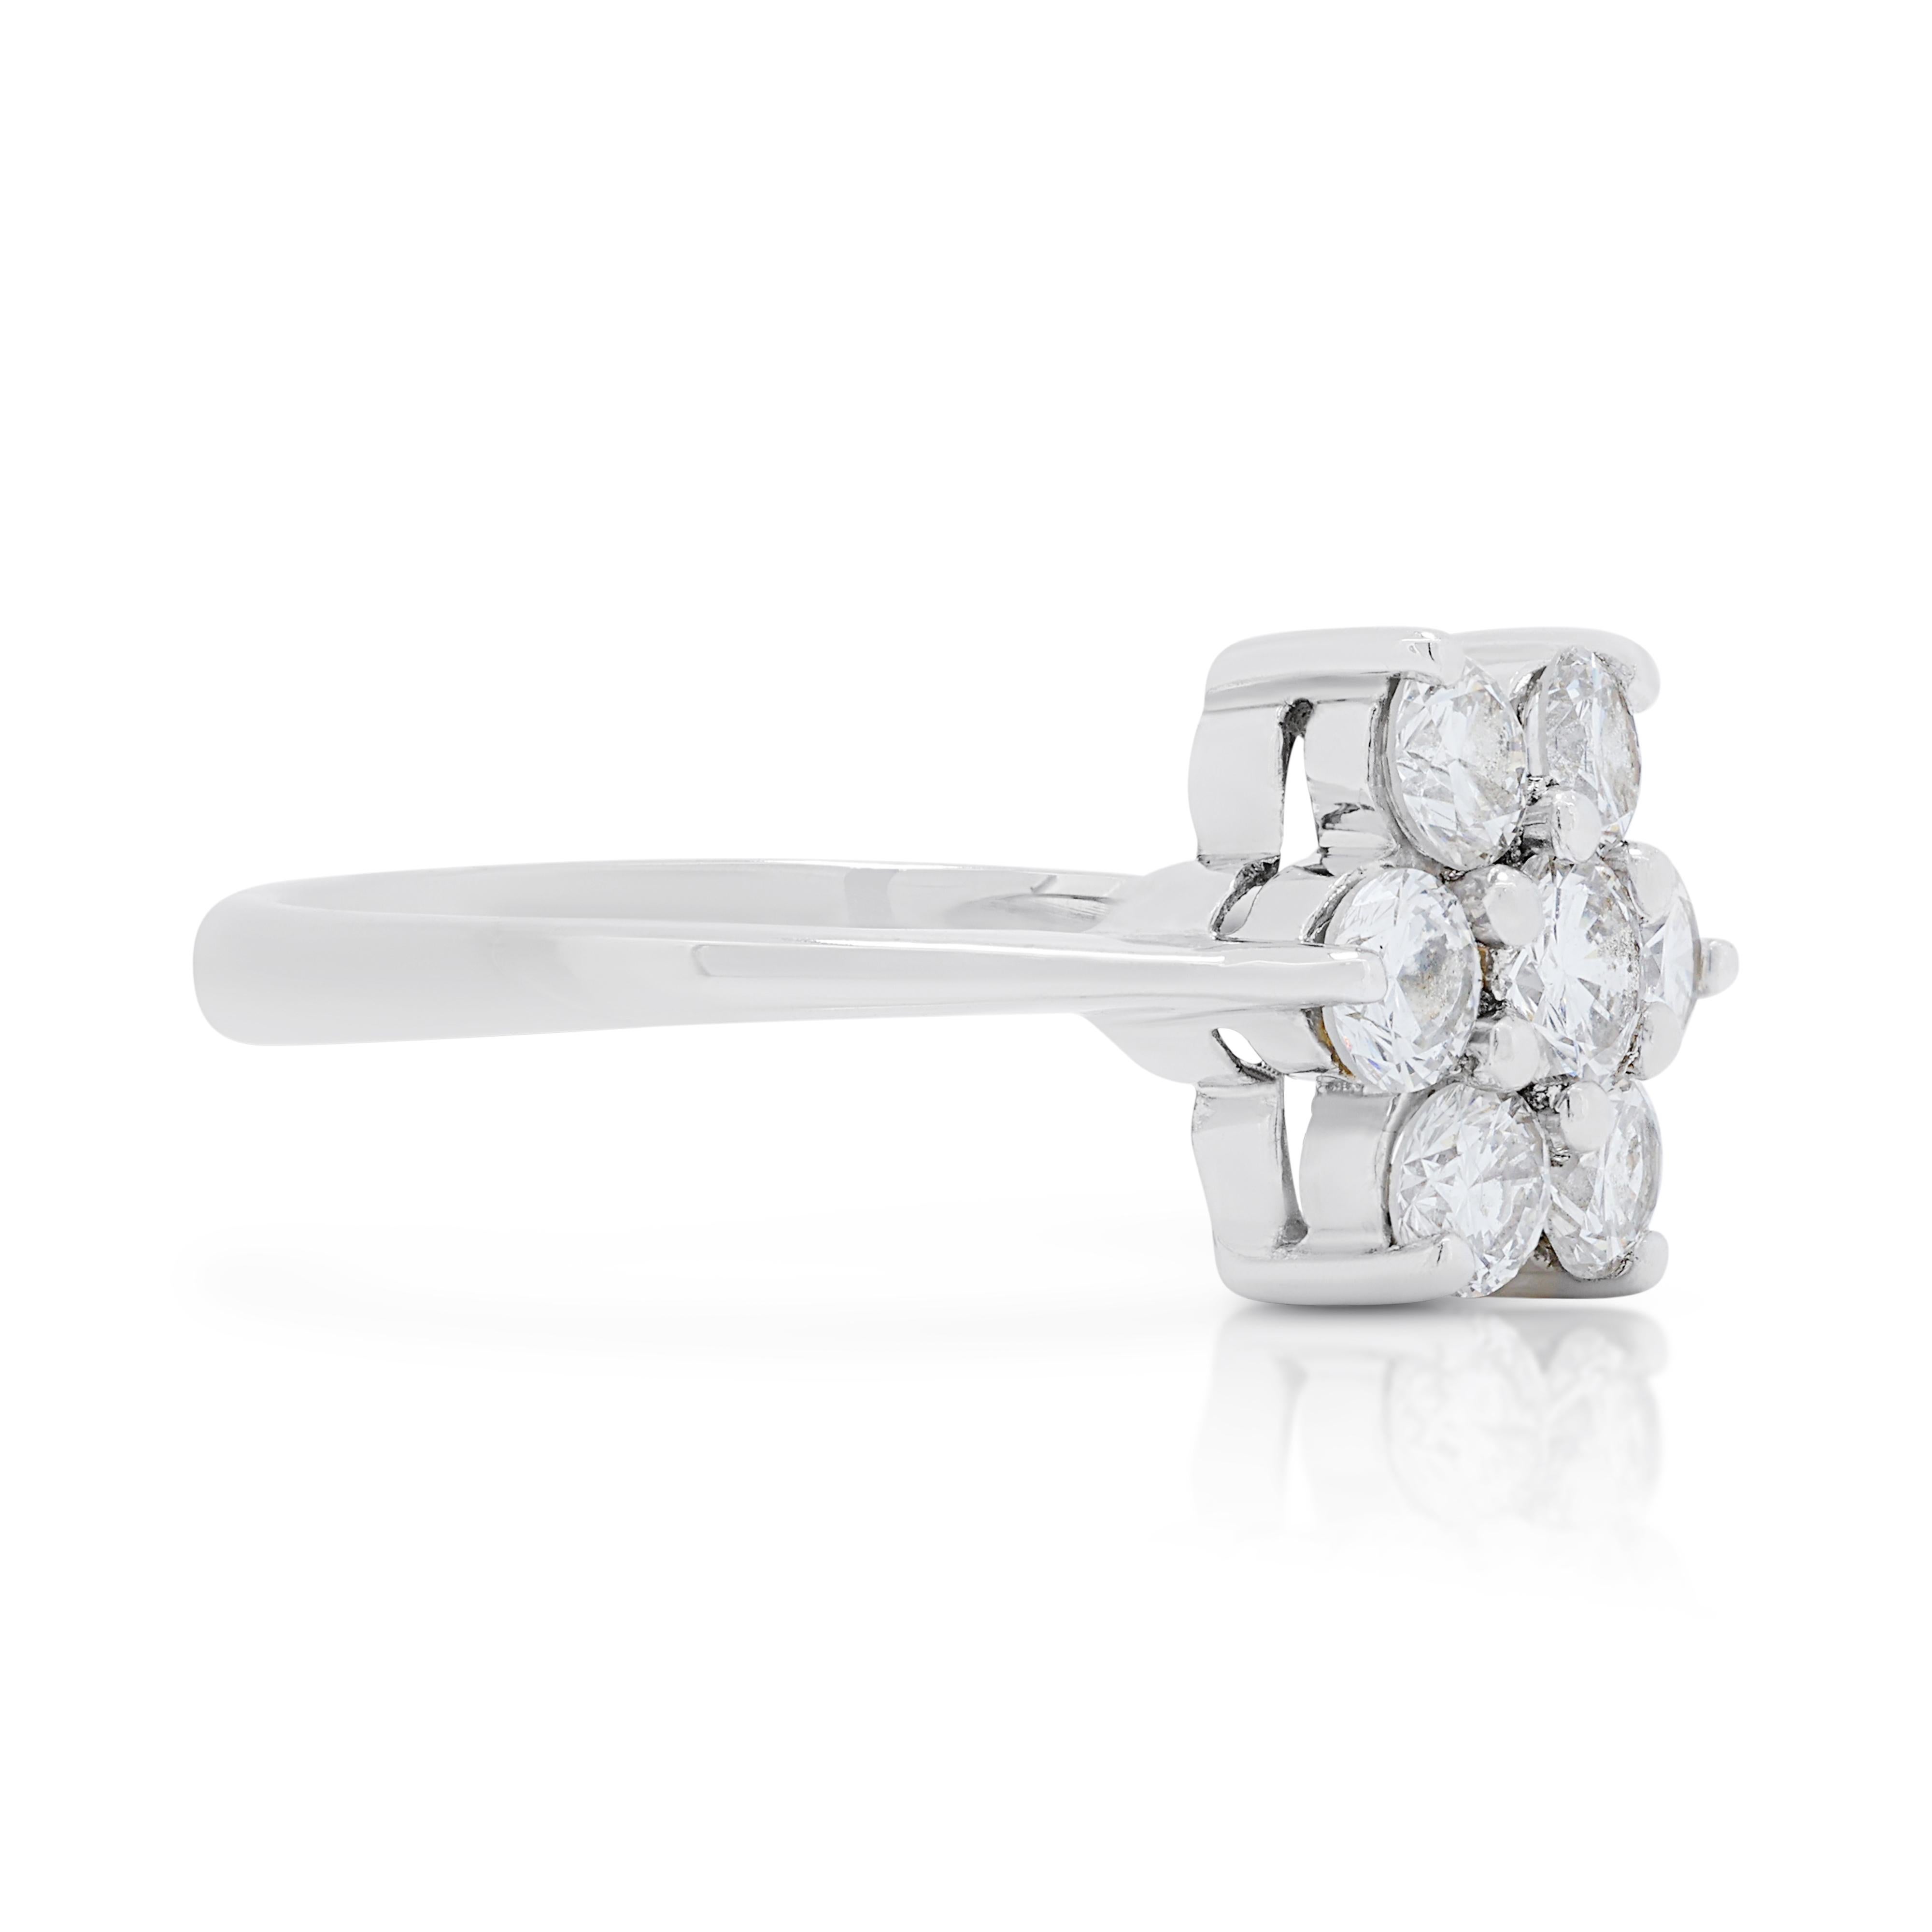 Elegant 0.68ct Diamond Flower Ring in 18K White Gold In Excellent Condition For Sale In רמת גן, IL